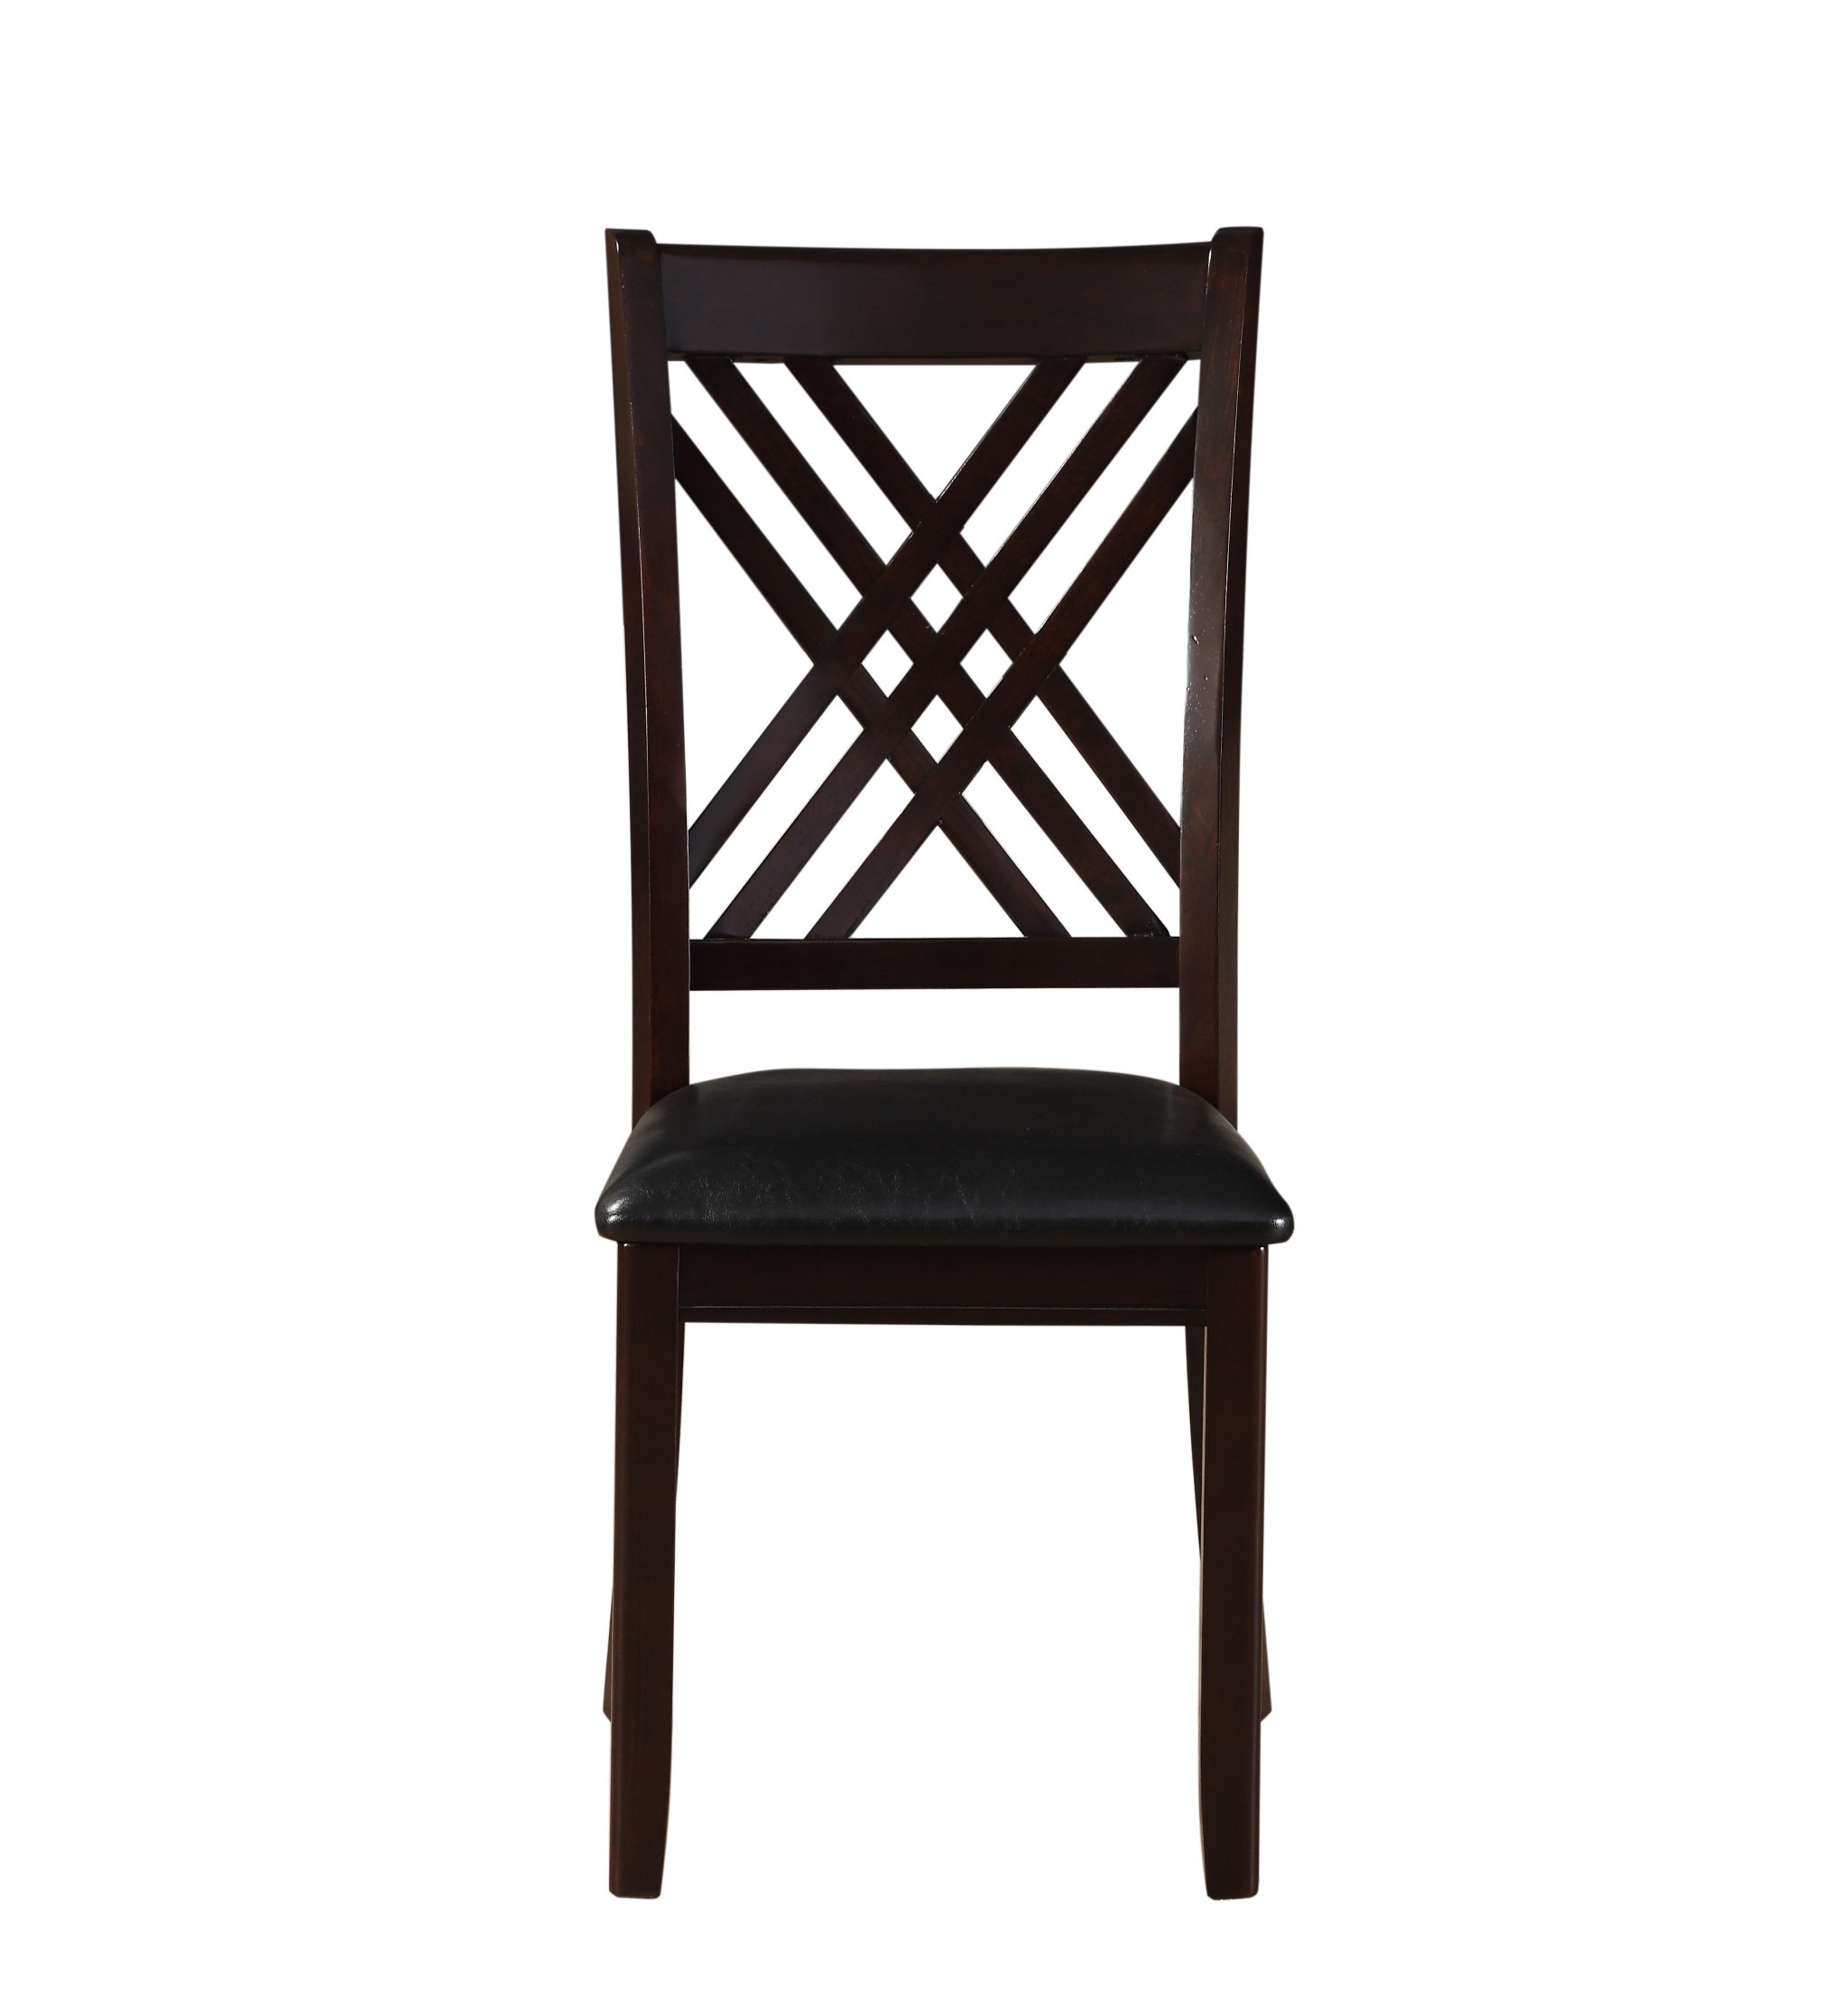 18" X 22" X 41" 2pc Black And Espresso Side Chair